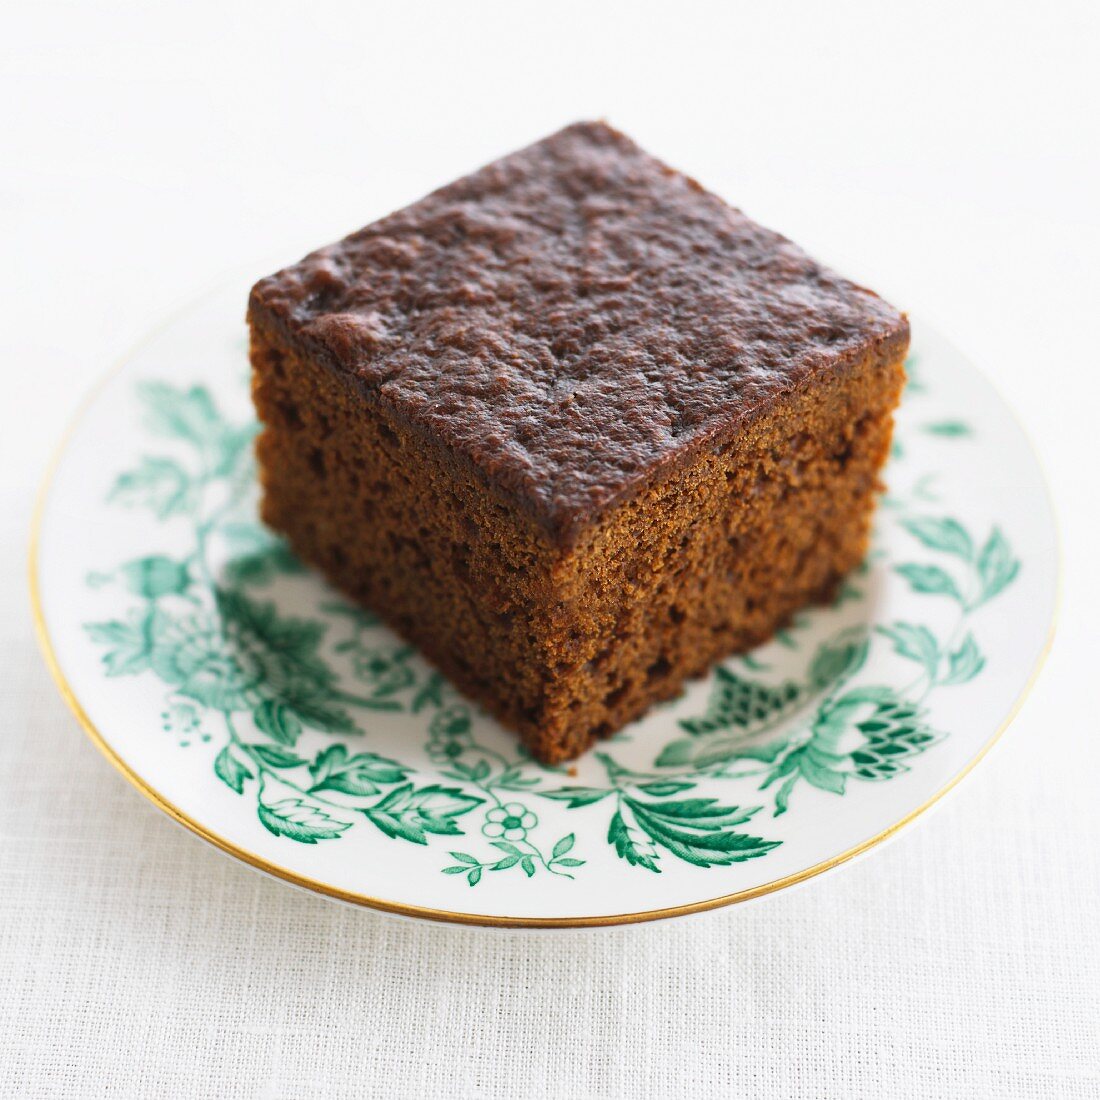 A piece of ginger cake on a plate